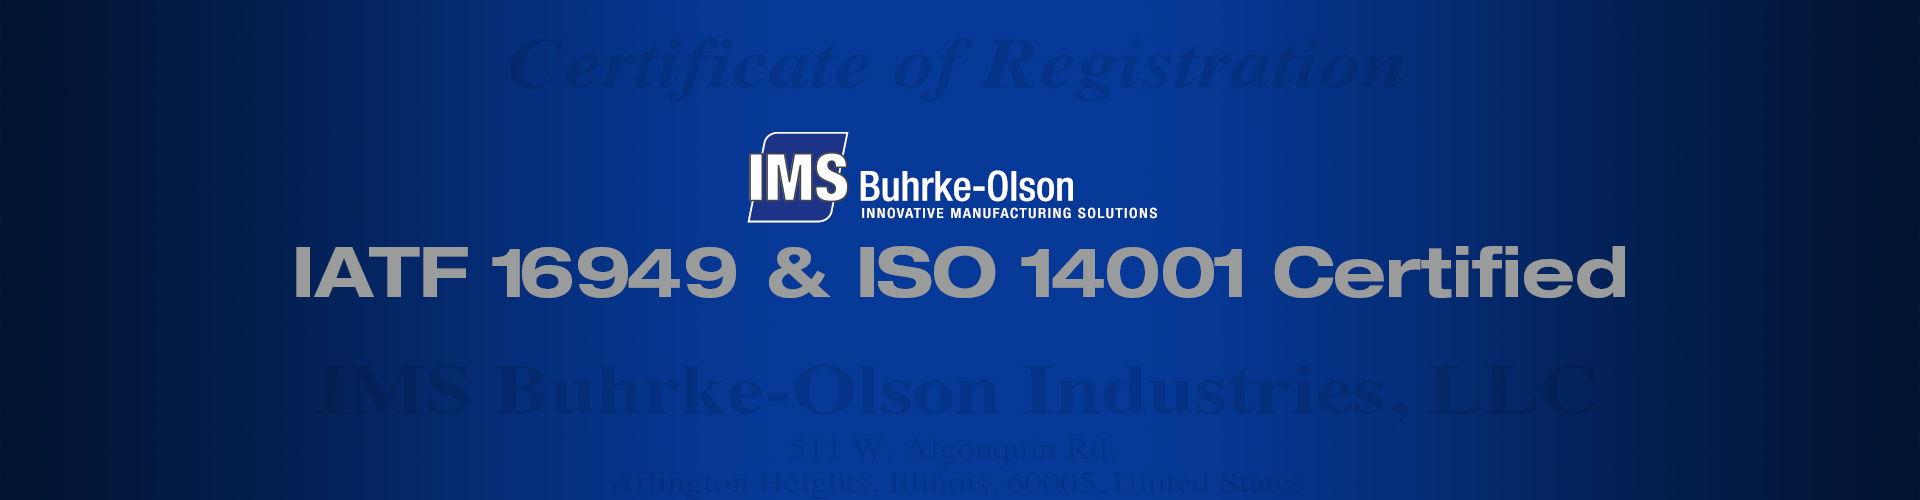 IMS Buhrke-Olson IATF 16949:2016 and ISO 14001:2015 certified